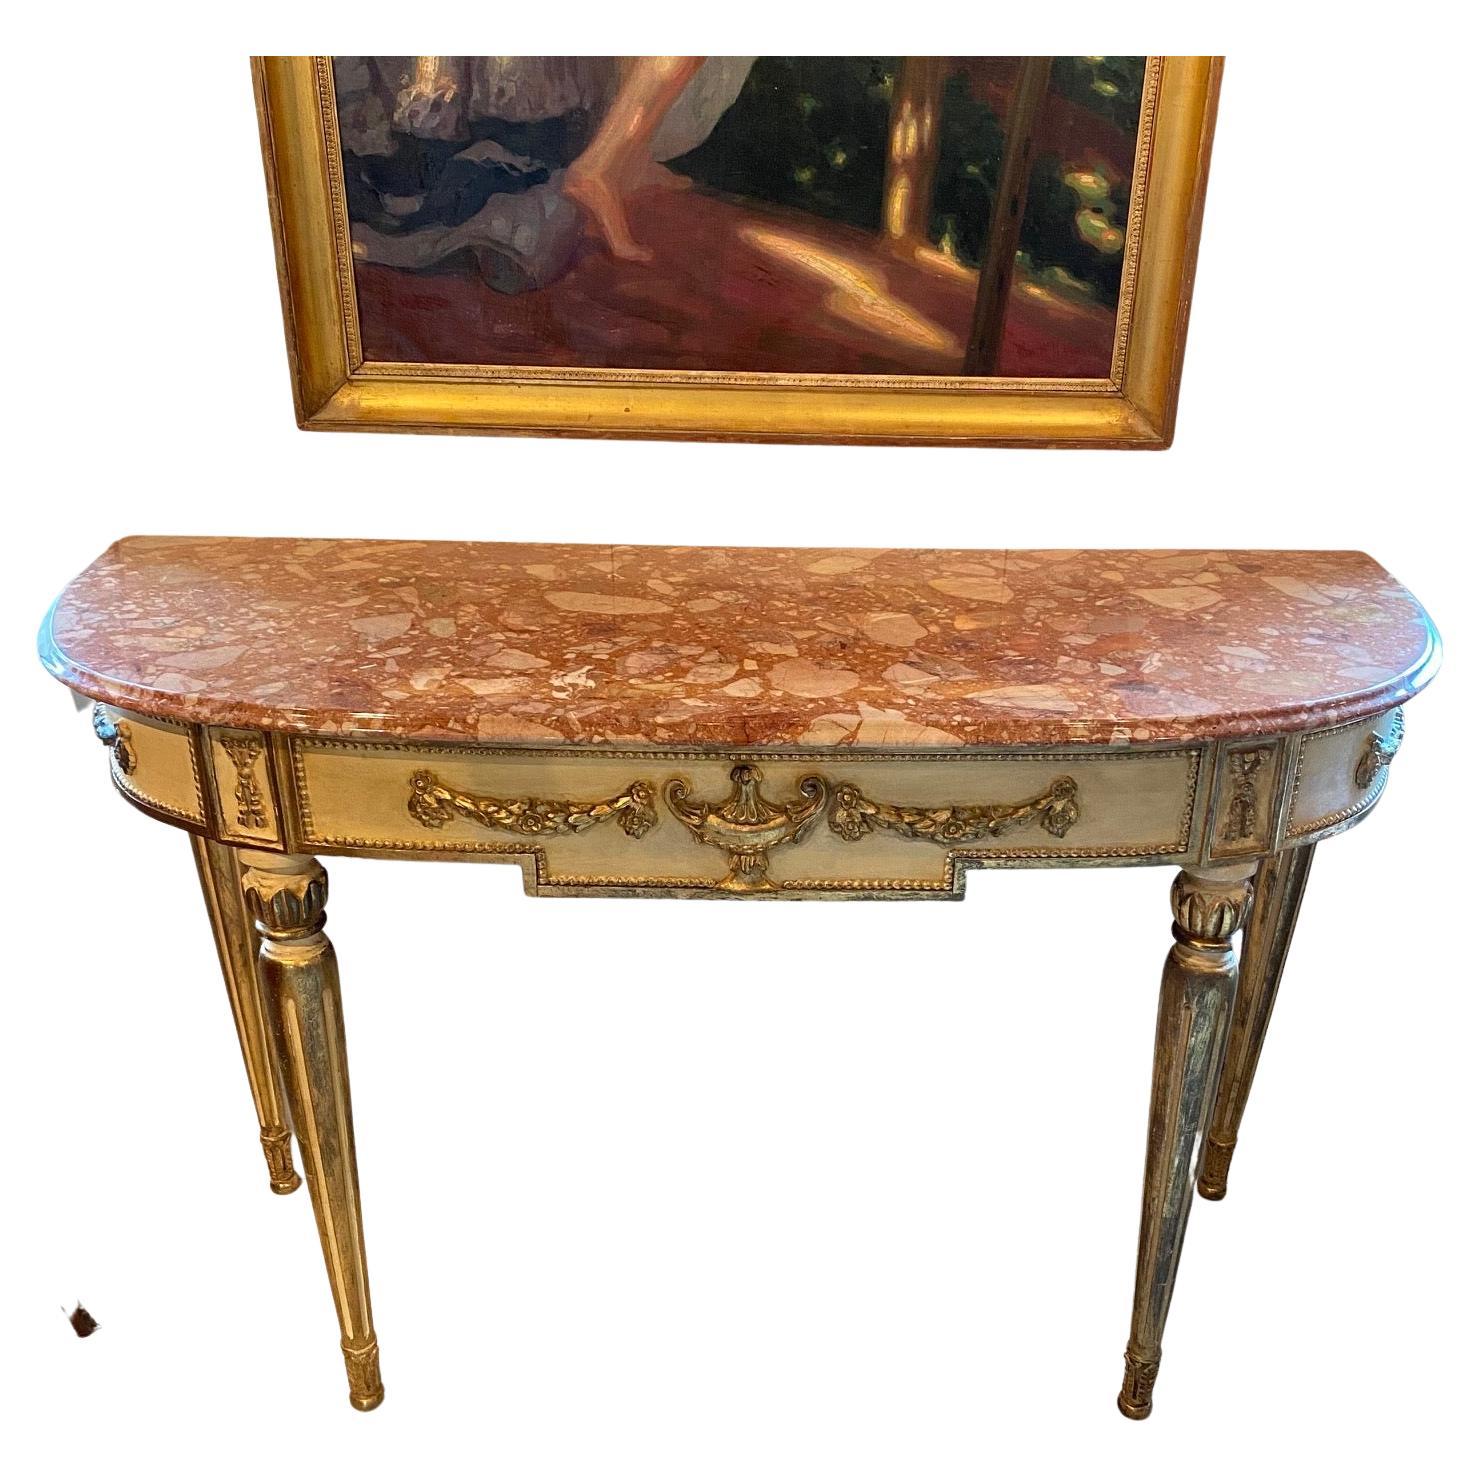 Glamorous antique French Louis XVI fancy painted and gilded demilune shaped console having rouge marble top. #5265.